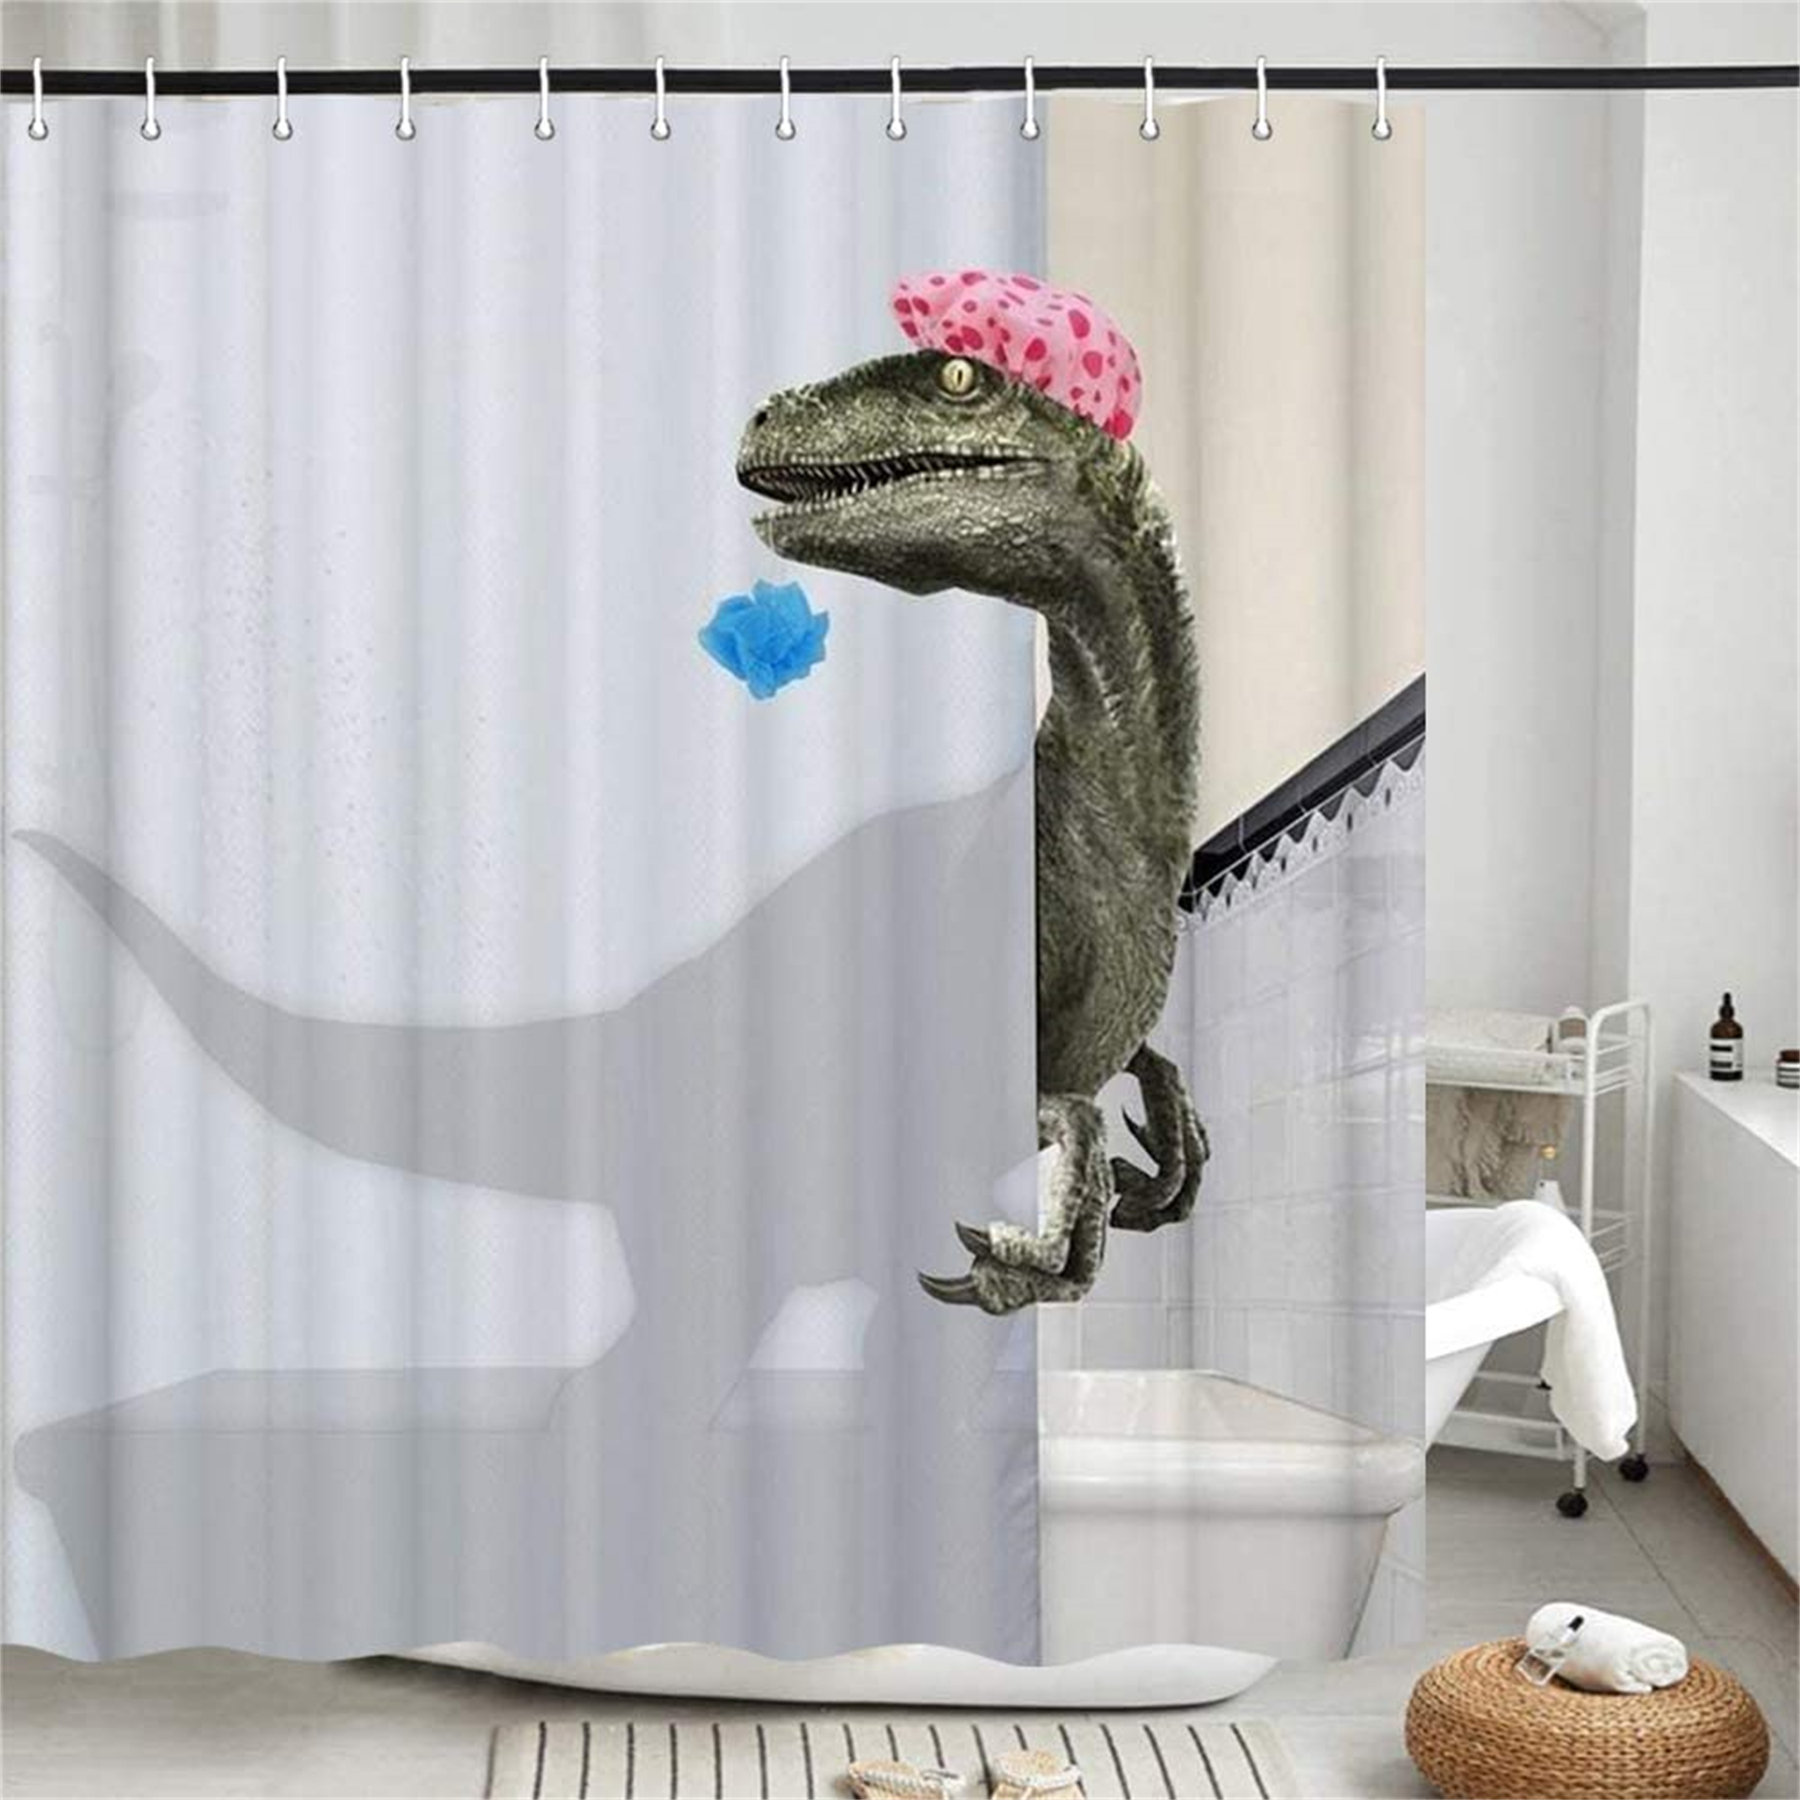 Fabric Shower Curtain and Bath Accessories 